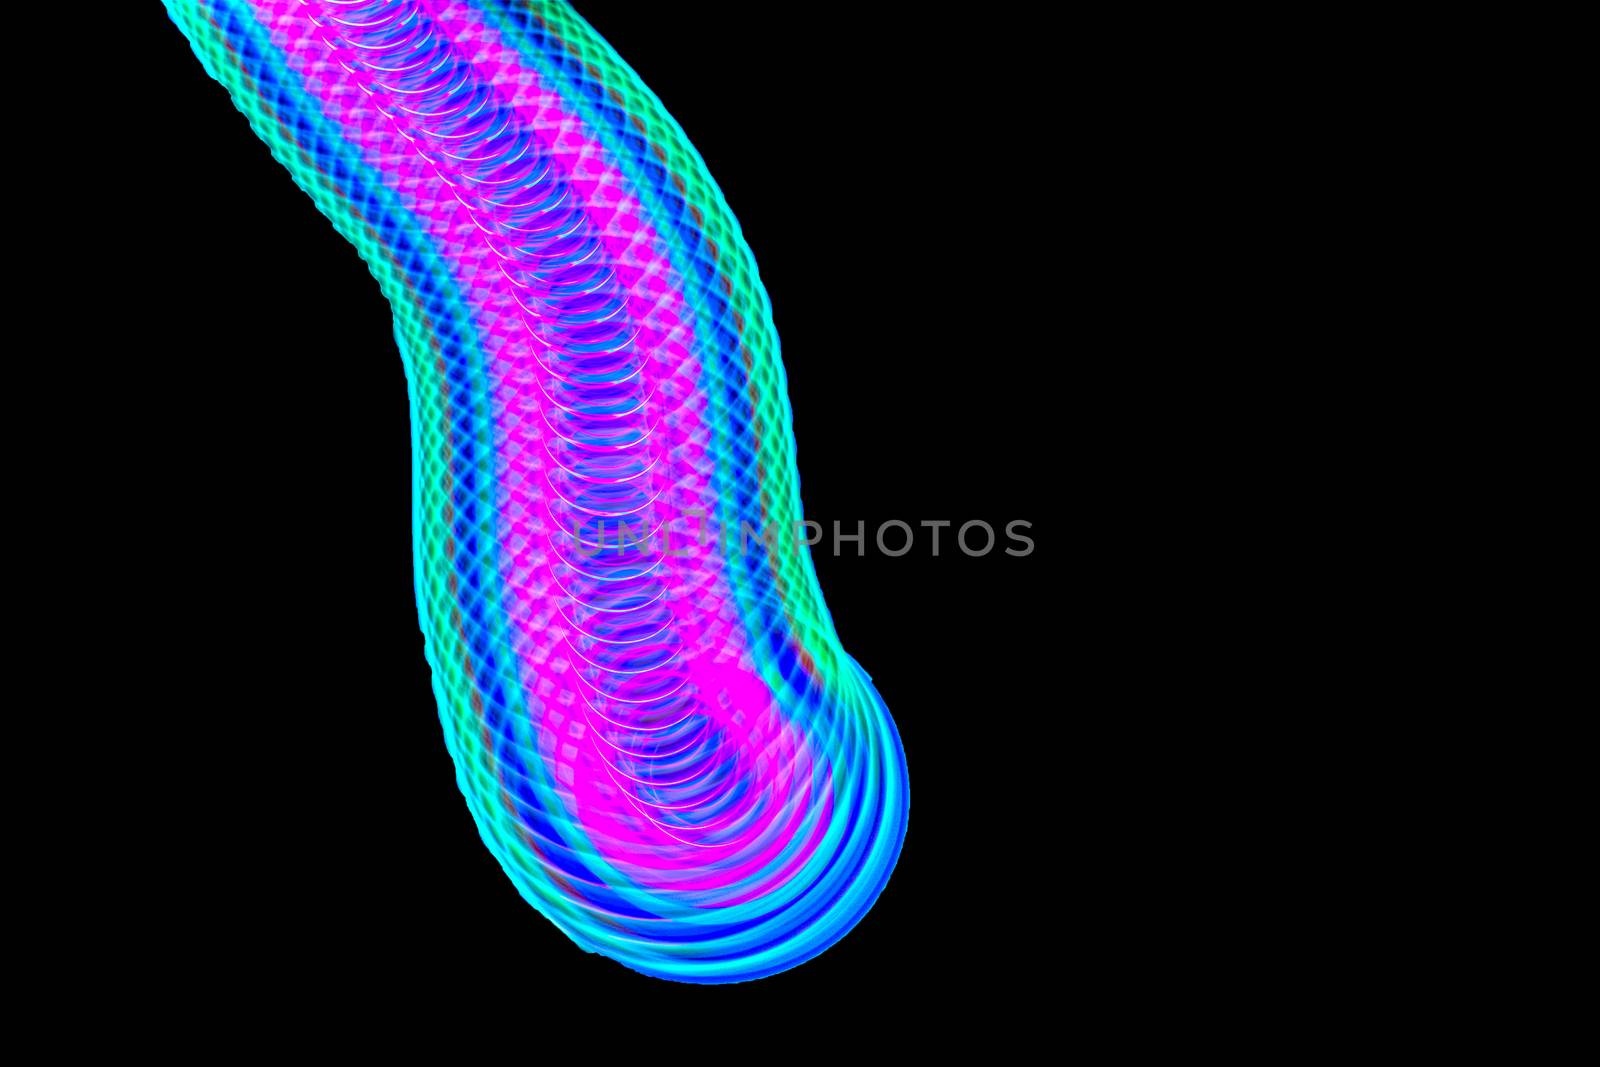 Long exposure photograph of a light spinning top with black background.